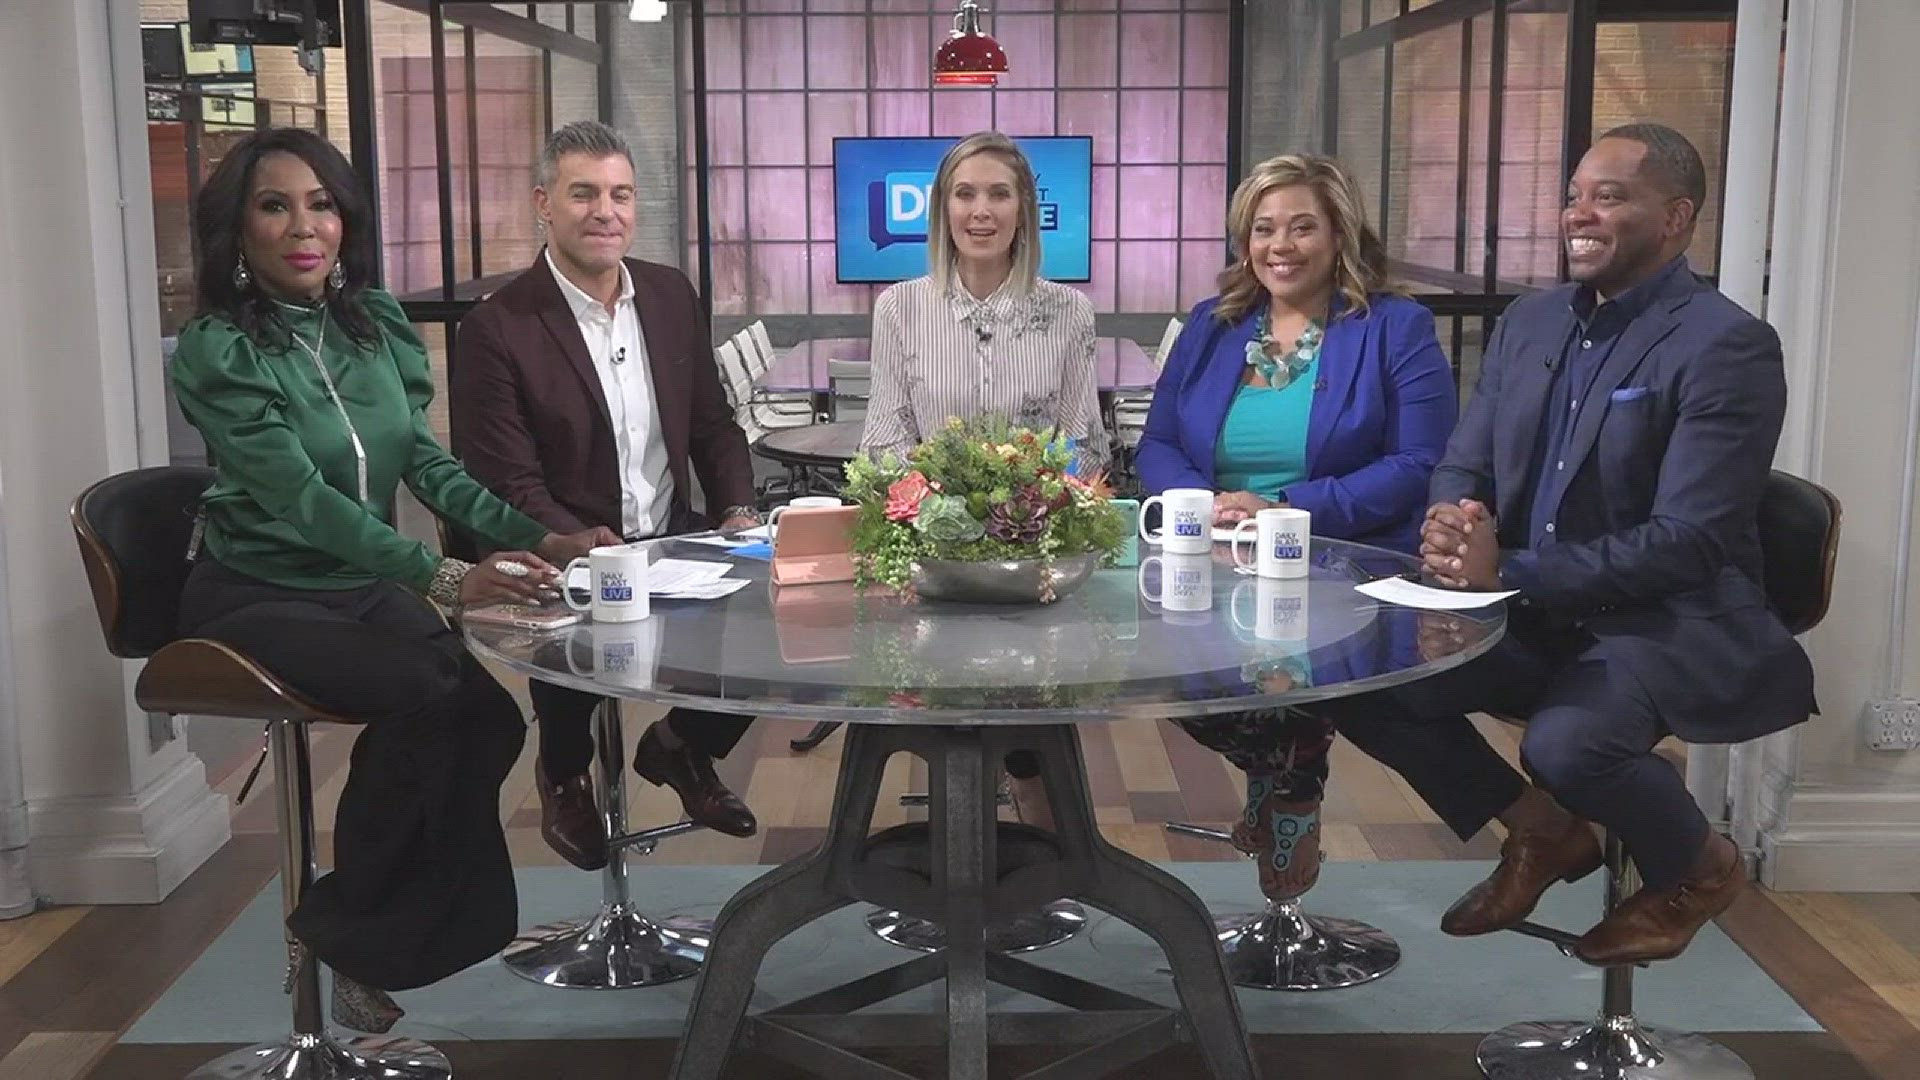 You see it in movies, on social media, and all over groceries stores, but has the culture of "mommy-drinking" gone too far? Daily Blast Live co-hosts discuss this dangerous trend that could be doing more damage than fun, as it perpetuates the "binge-drink